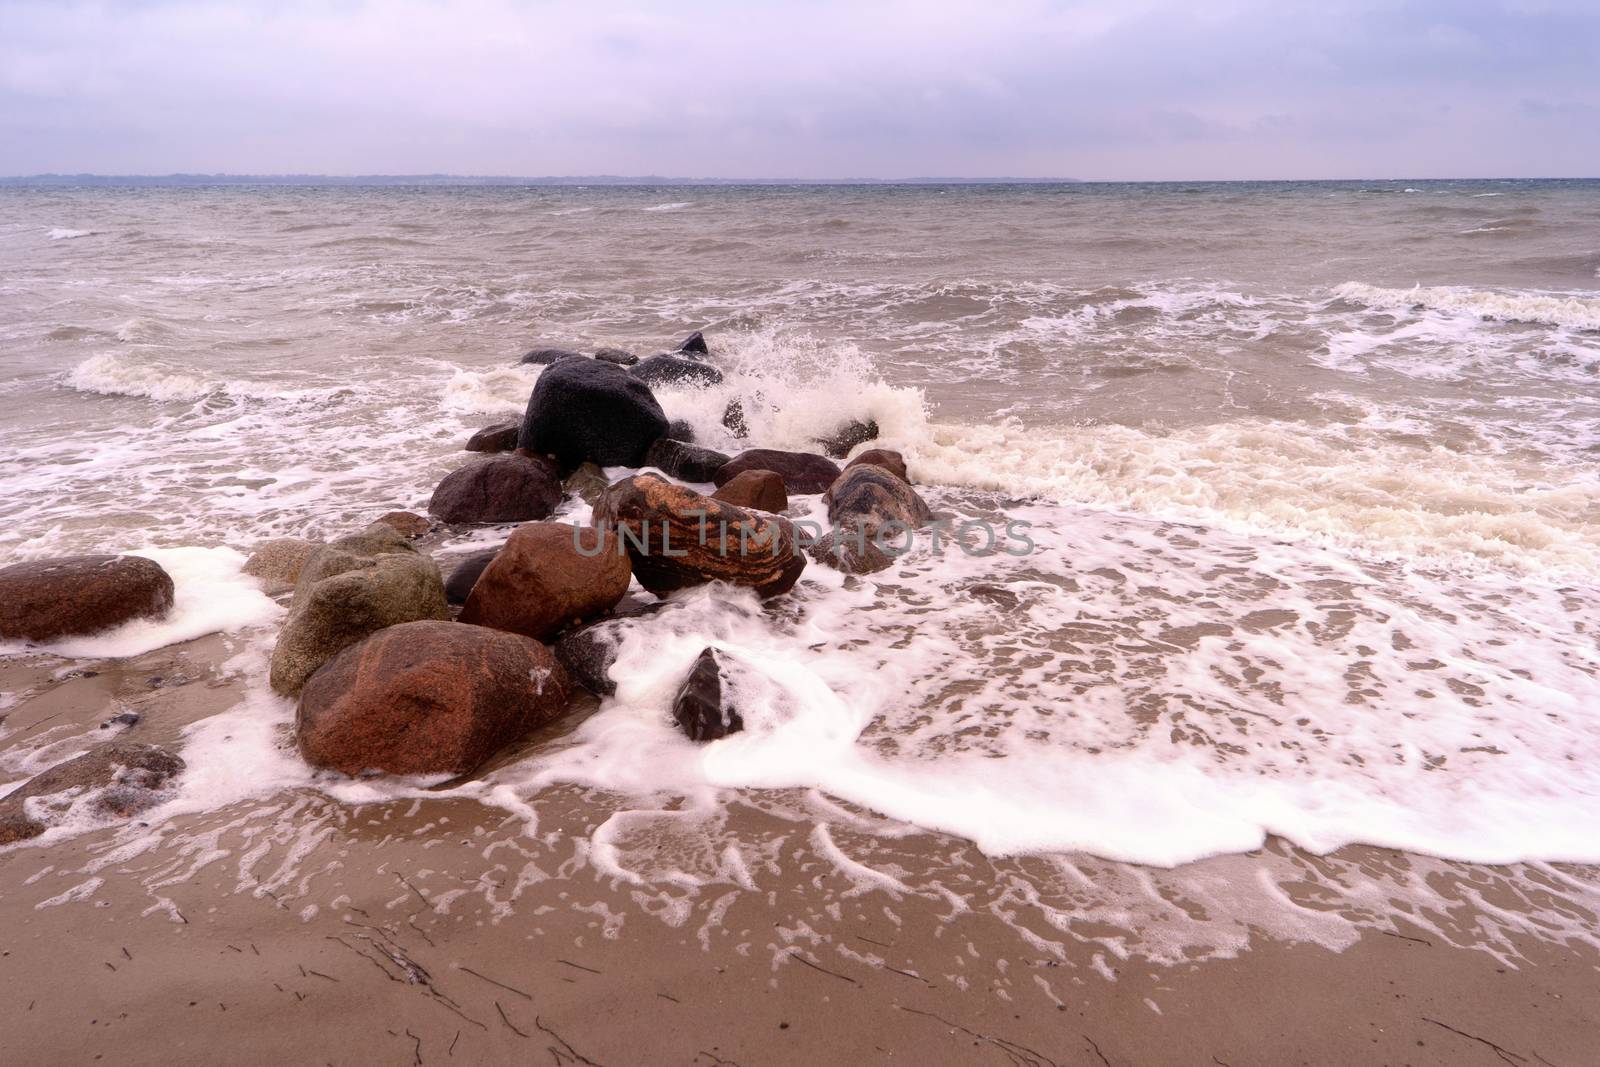 Surge of the Baltic Sea in Germany by 3quarks